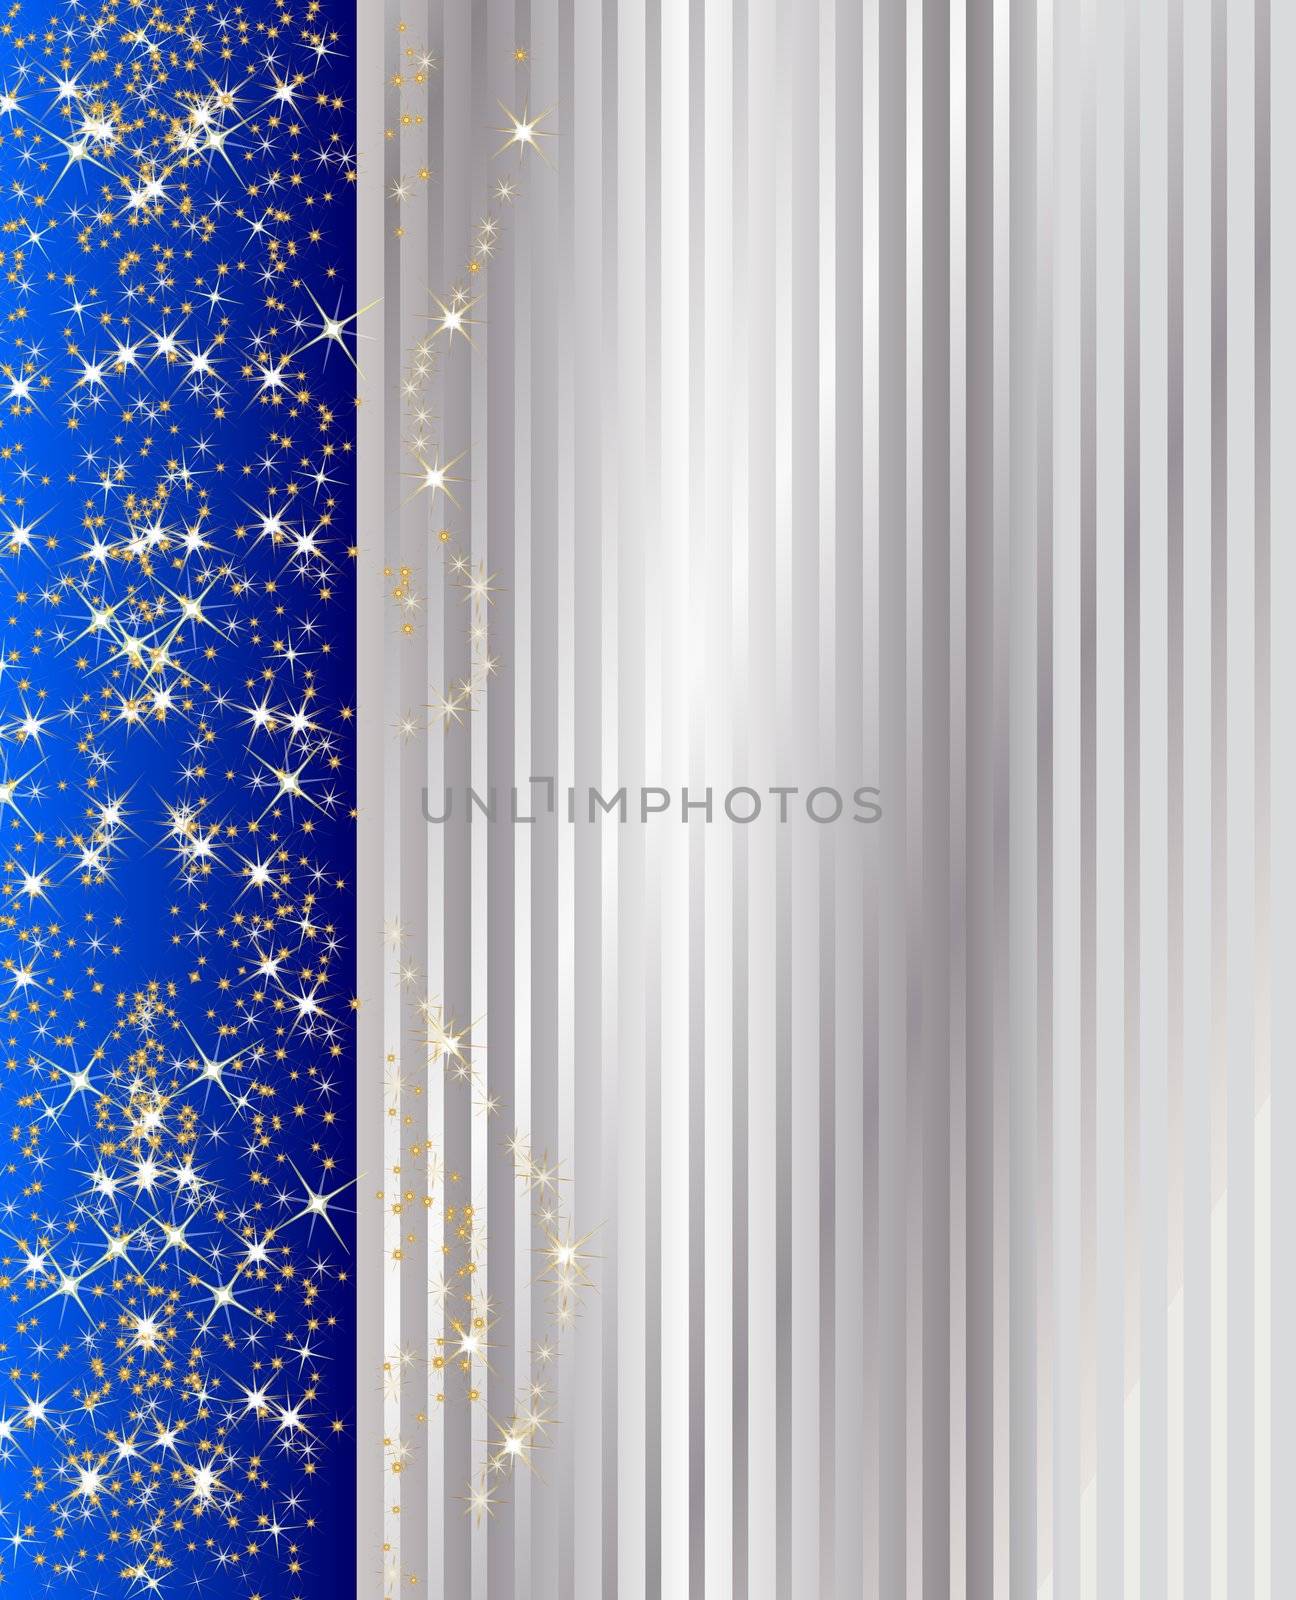 christmasframe with stars by peromarketing